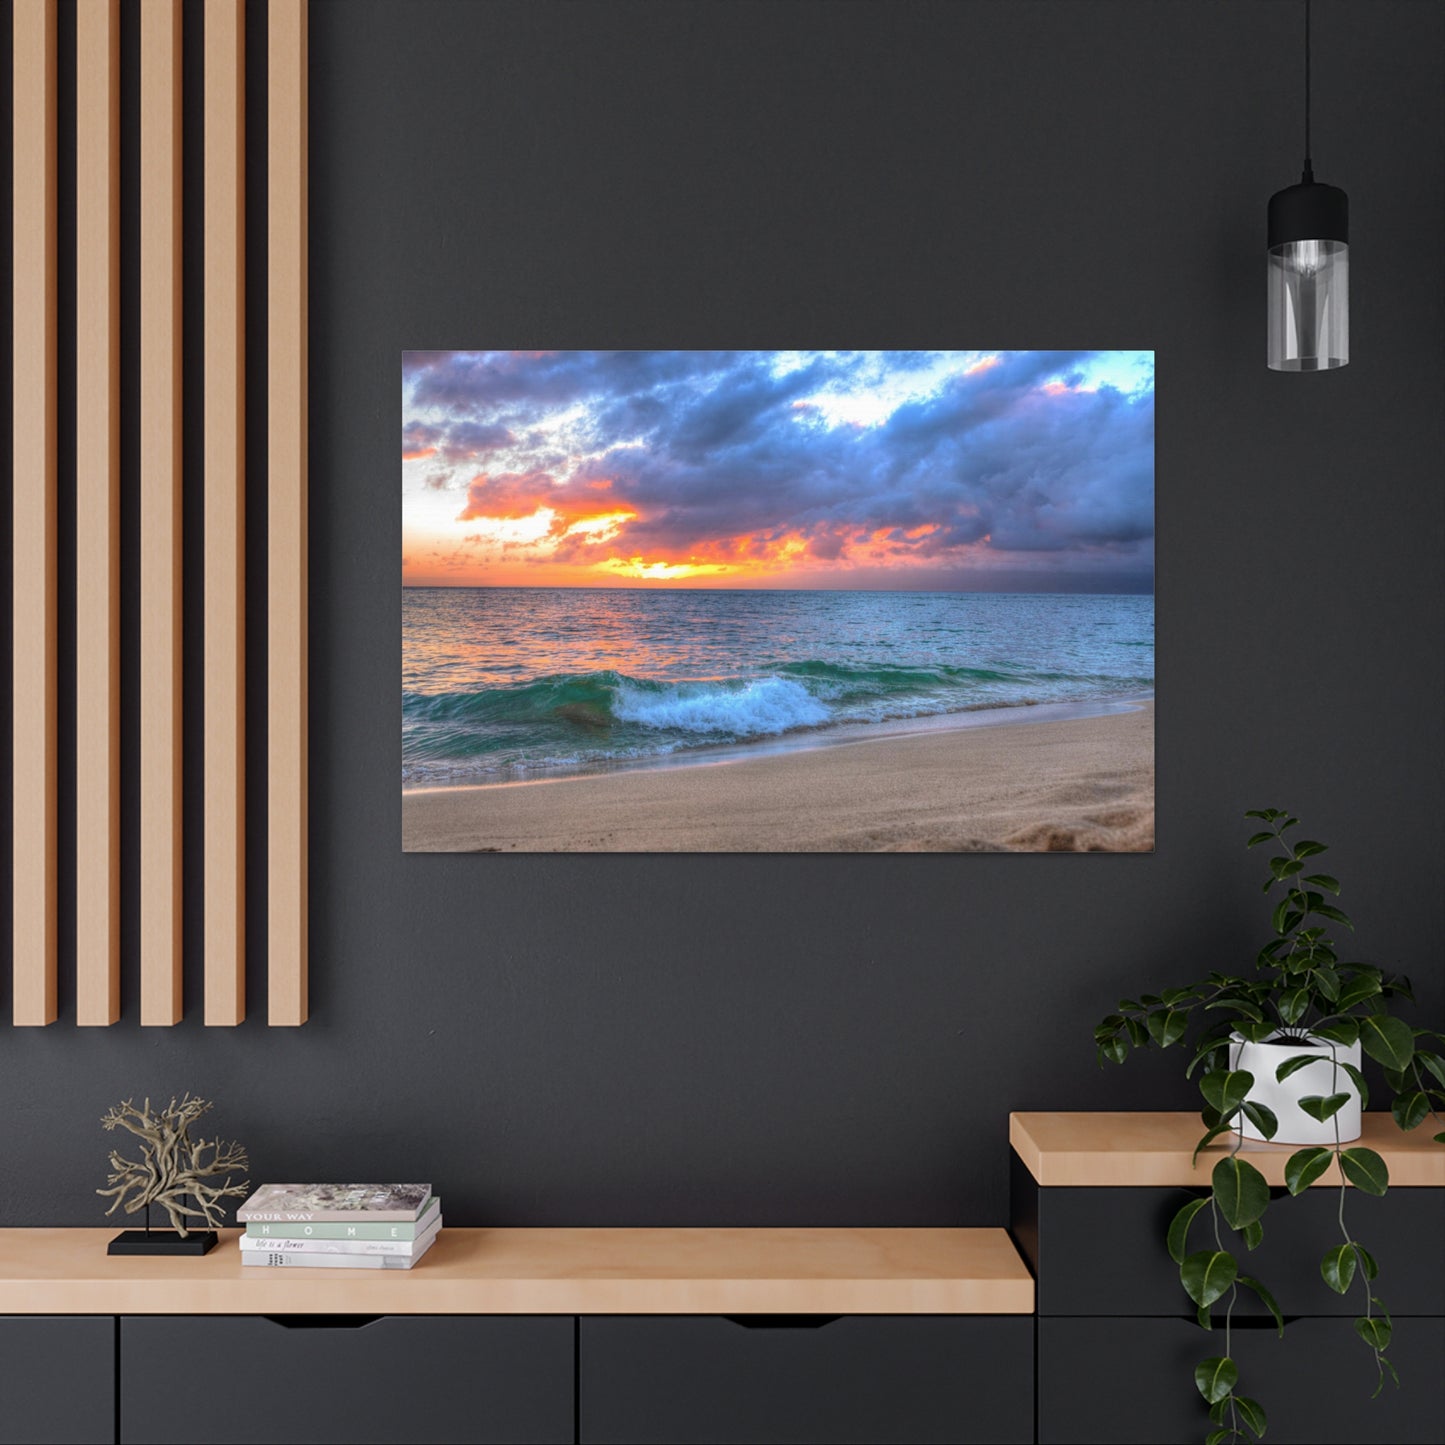 Canvas Print Of A Wave At Sunset In Hawaii For Wall Art